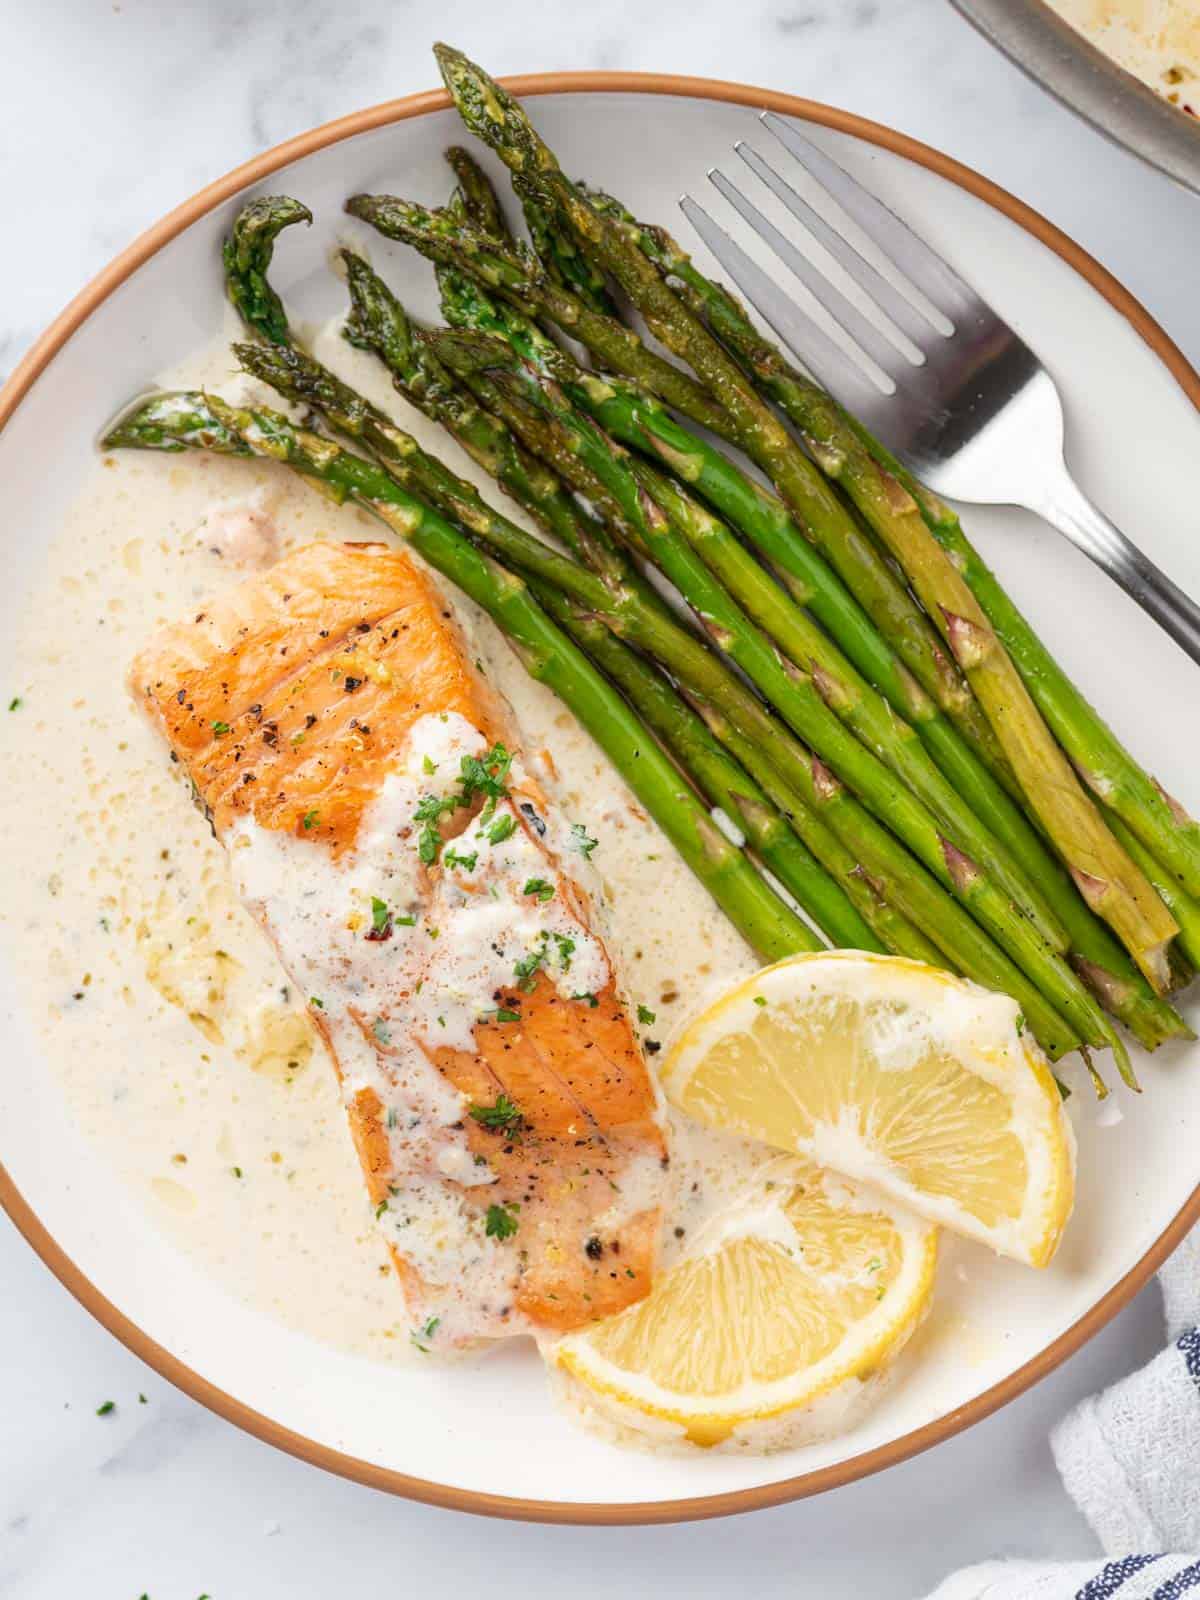 A plate with a fillet of salmon with creamy lemon butter sauce with asparagus and lemon slices.